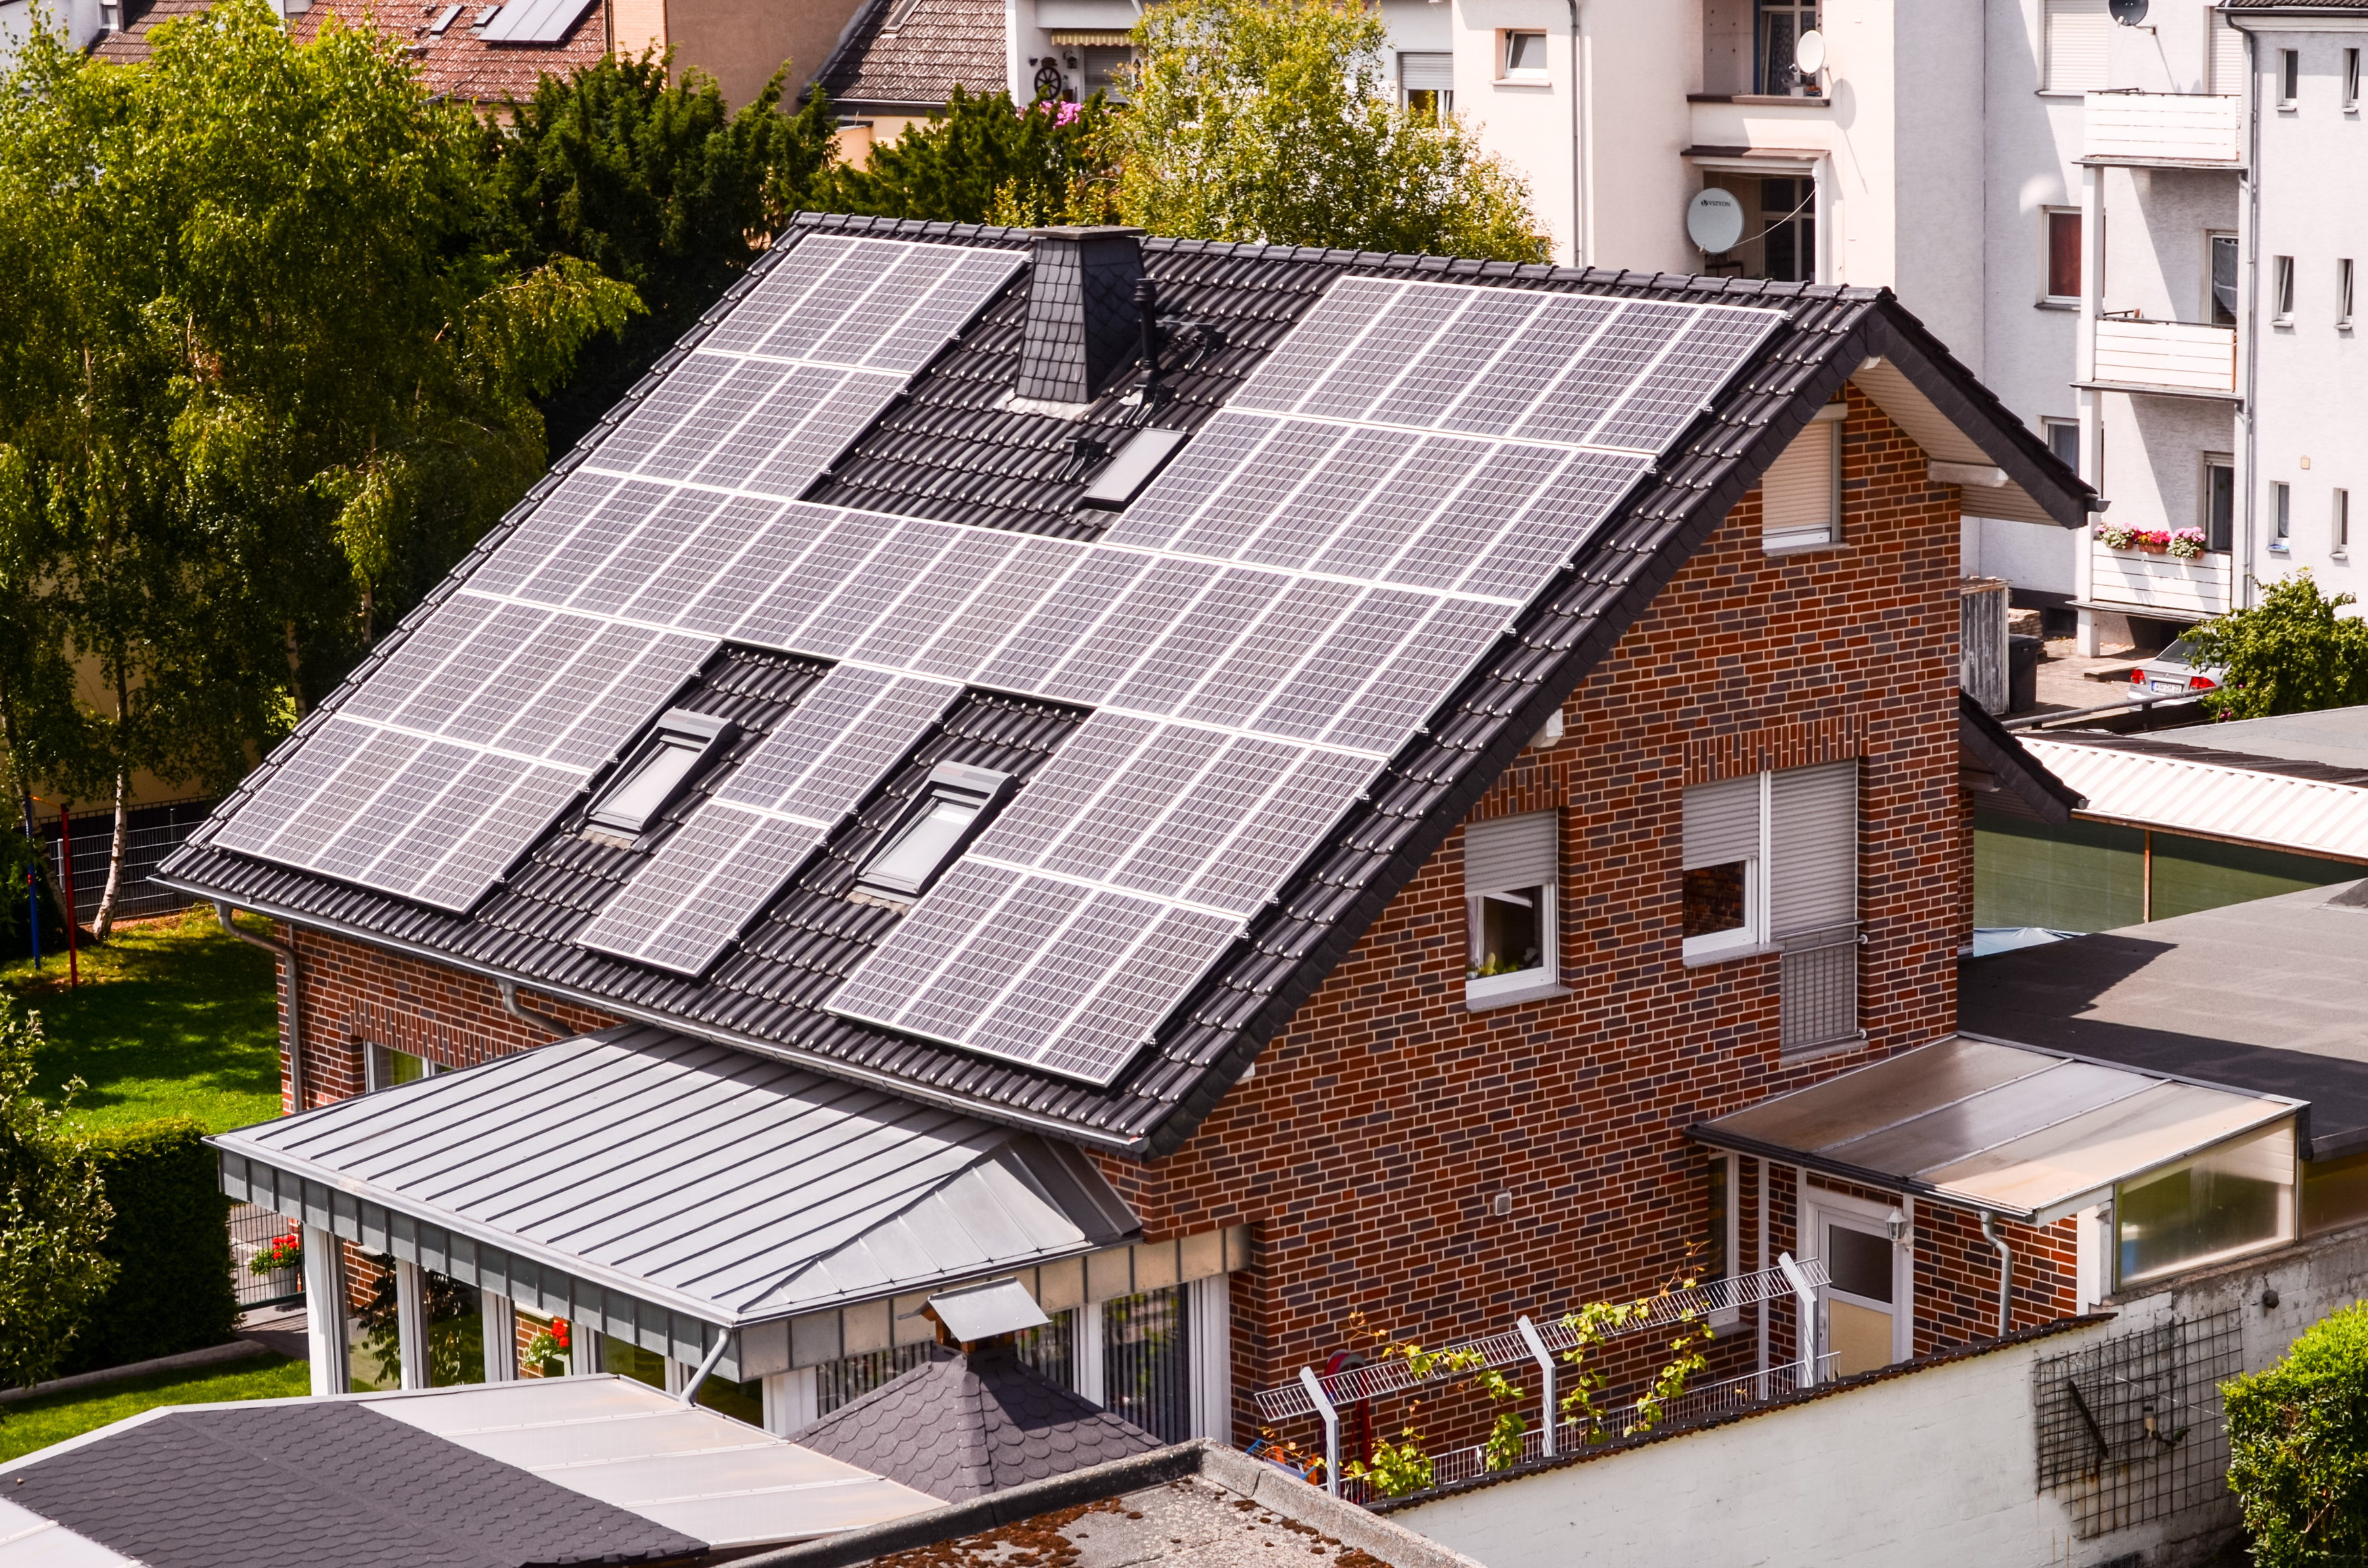 Rooftop photovoltaics become the largest photovoltaic installations in the UK